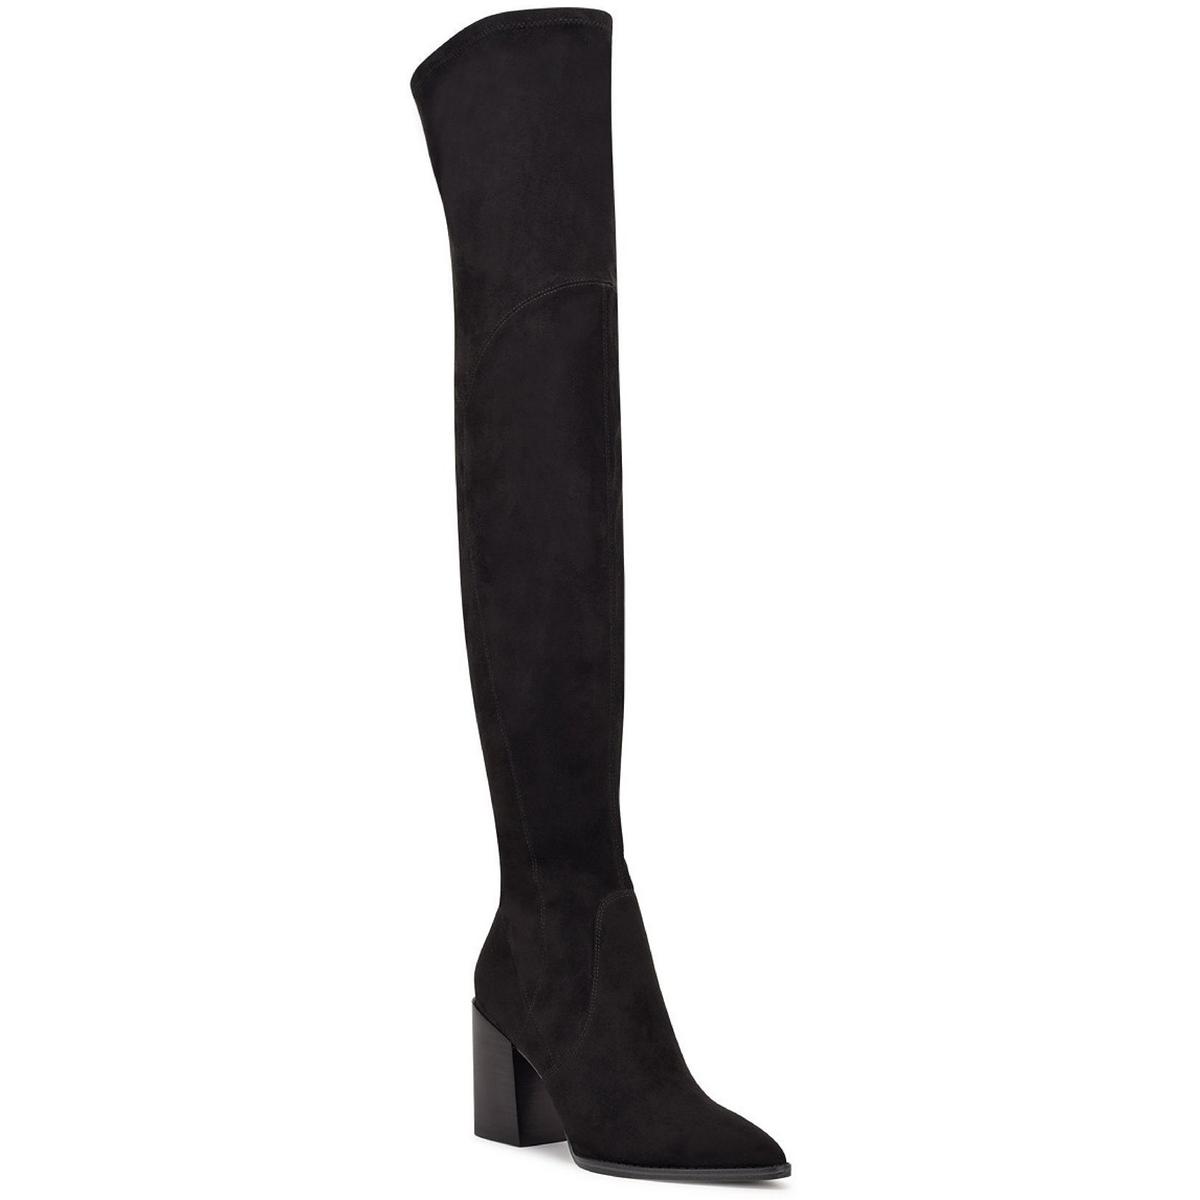 Nine West Barret 2 Womens Over-The-Knee Boots